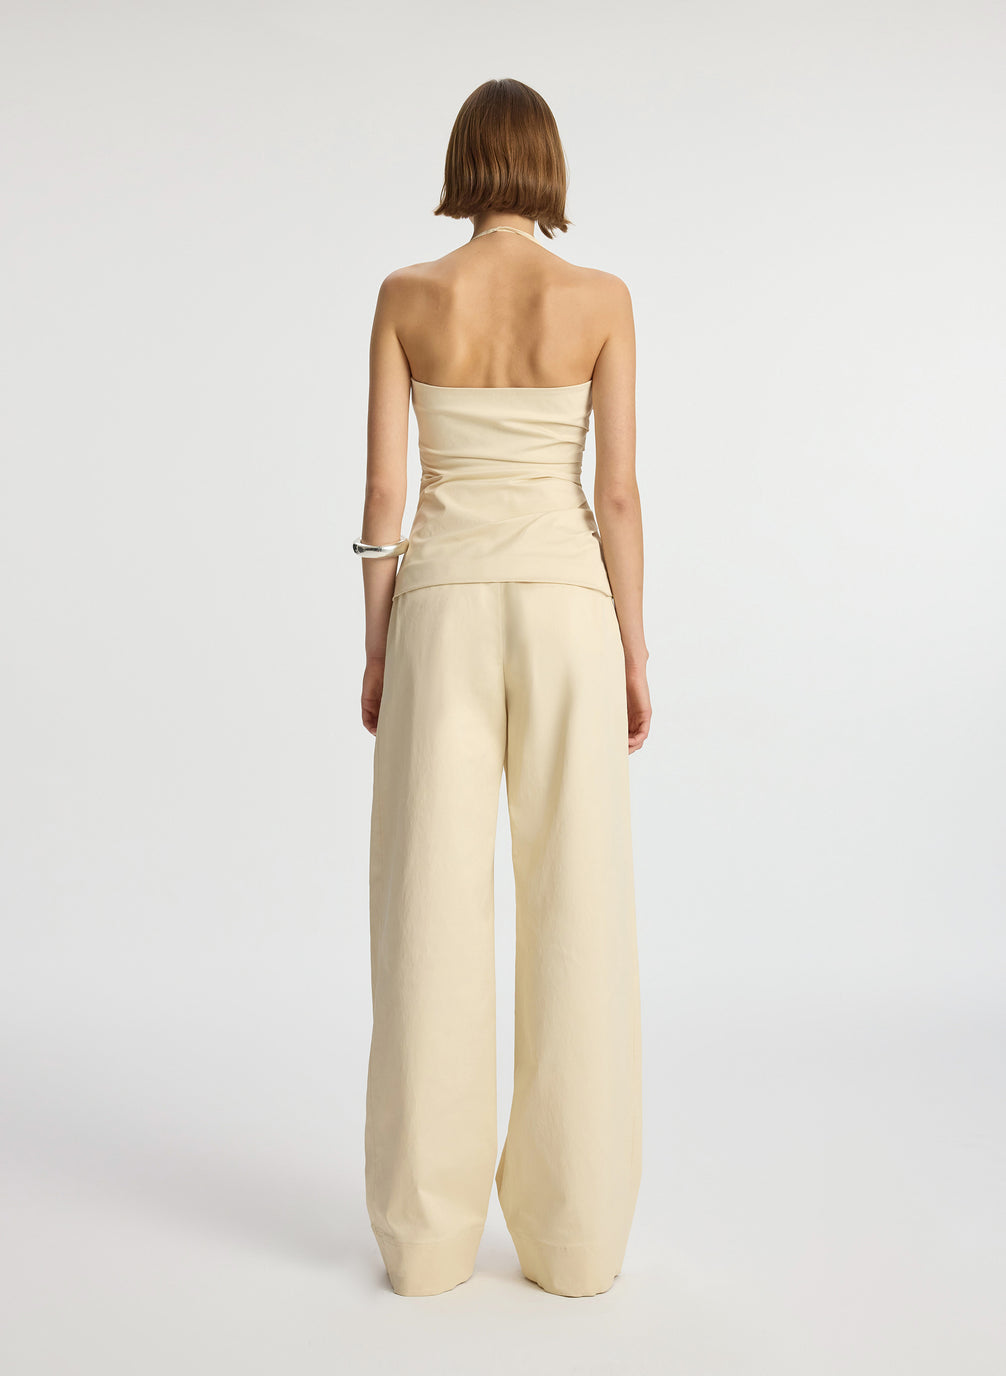 back view of woman wearing beige sateen halter top and matching sateen wide leg pants